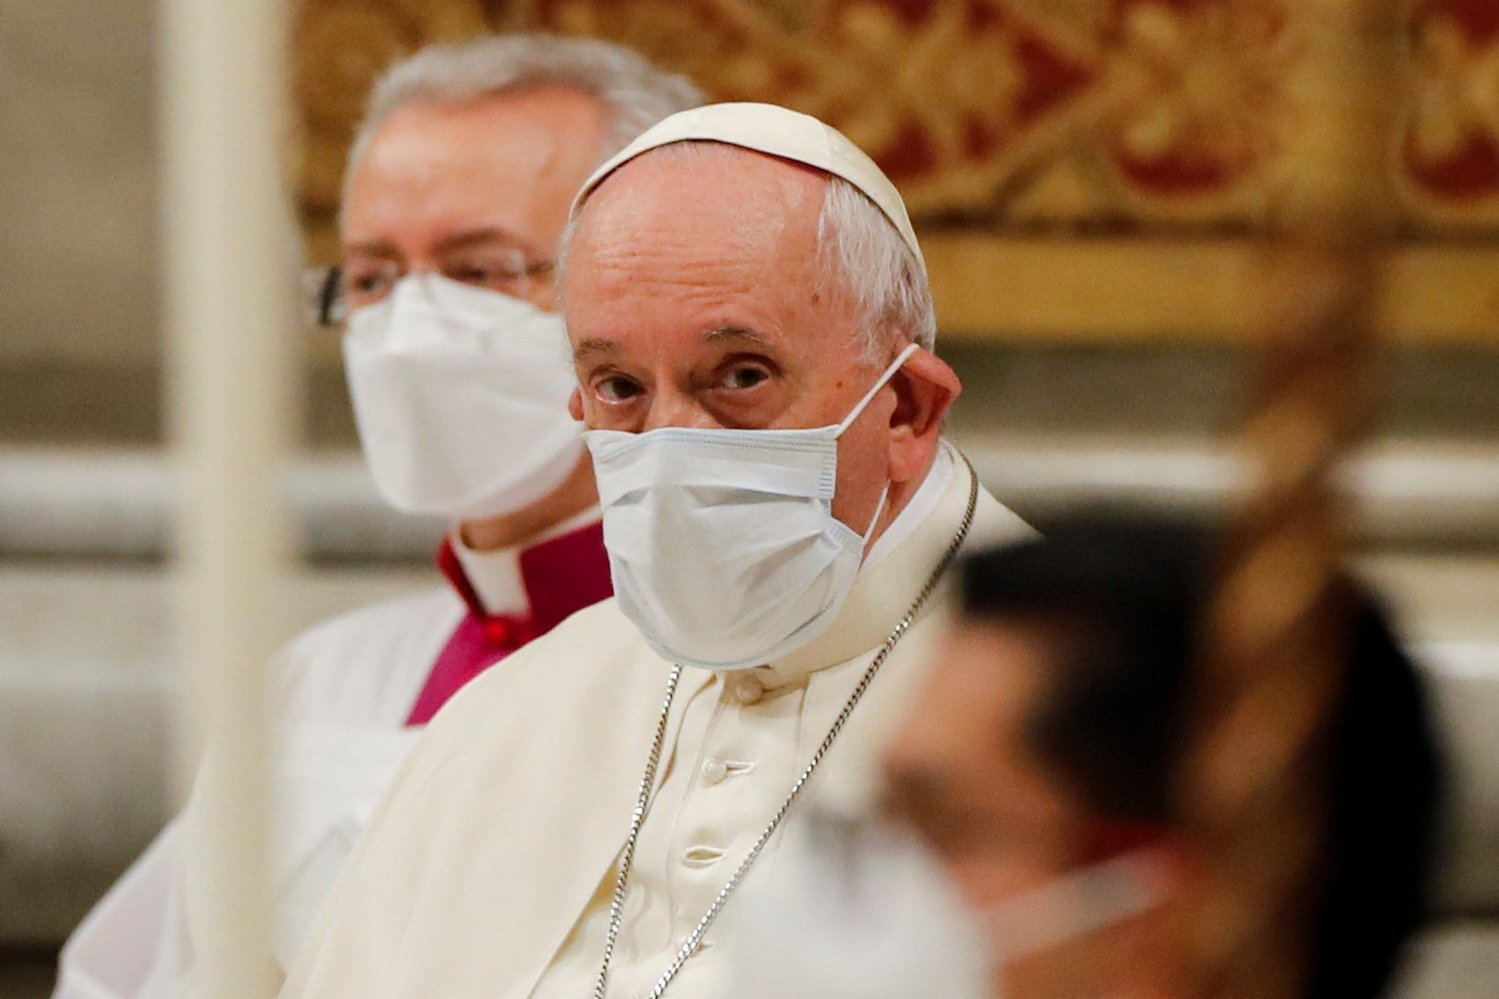 Pope Francis wears a mask for protection from COVID-19 as he participates in an evening prayer service in St. Peter's Basilica at the Vatican Dec. 31, 2021. The traditional service on New Year's Eve gave thanks for the past year. (CNS photo/Remo Casilli, Reuters).